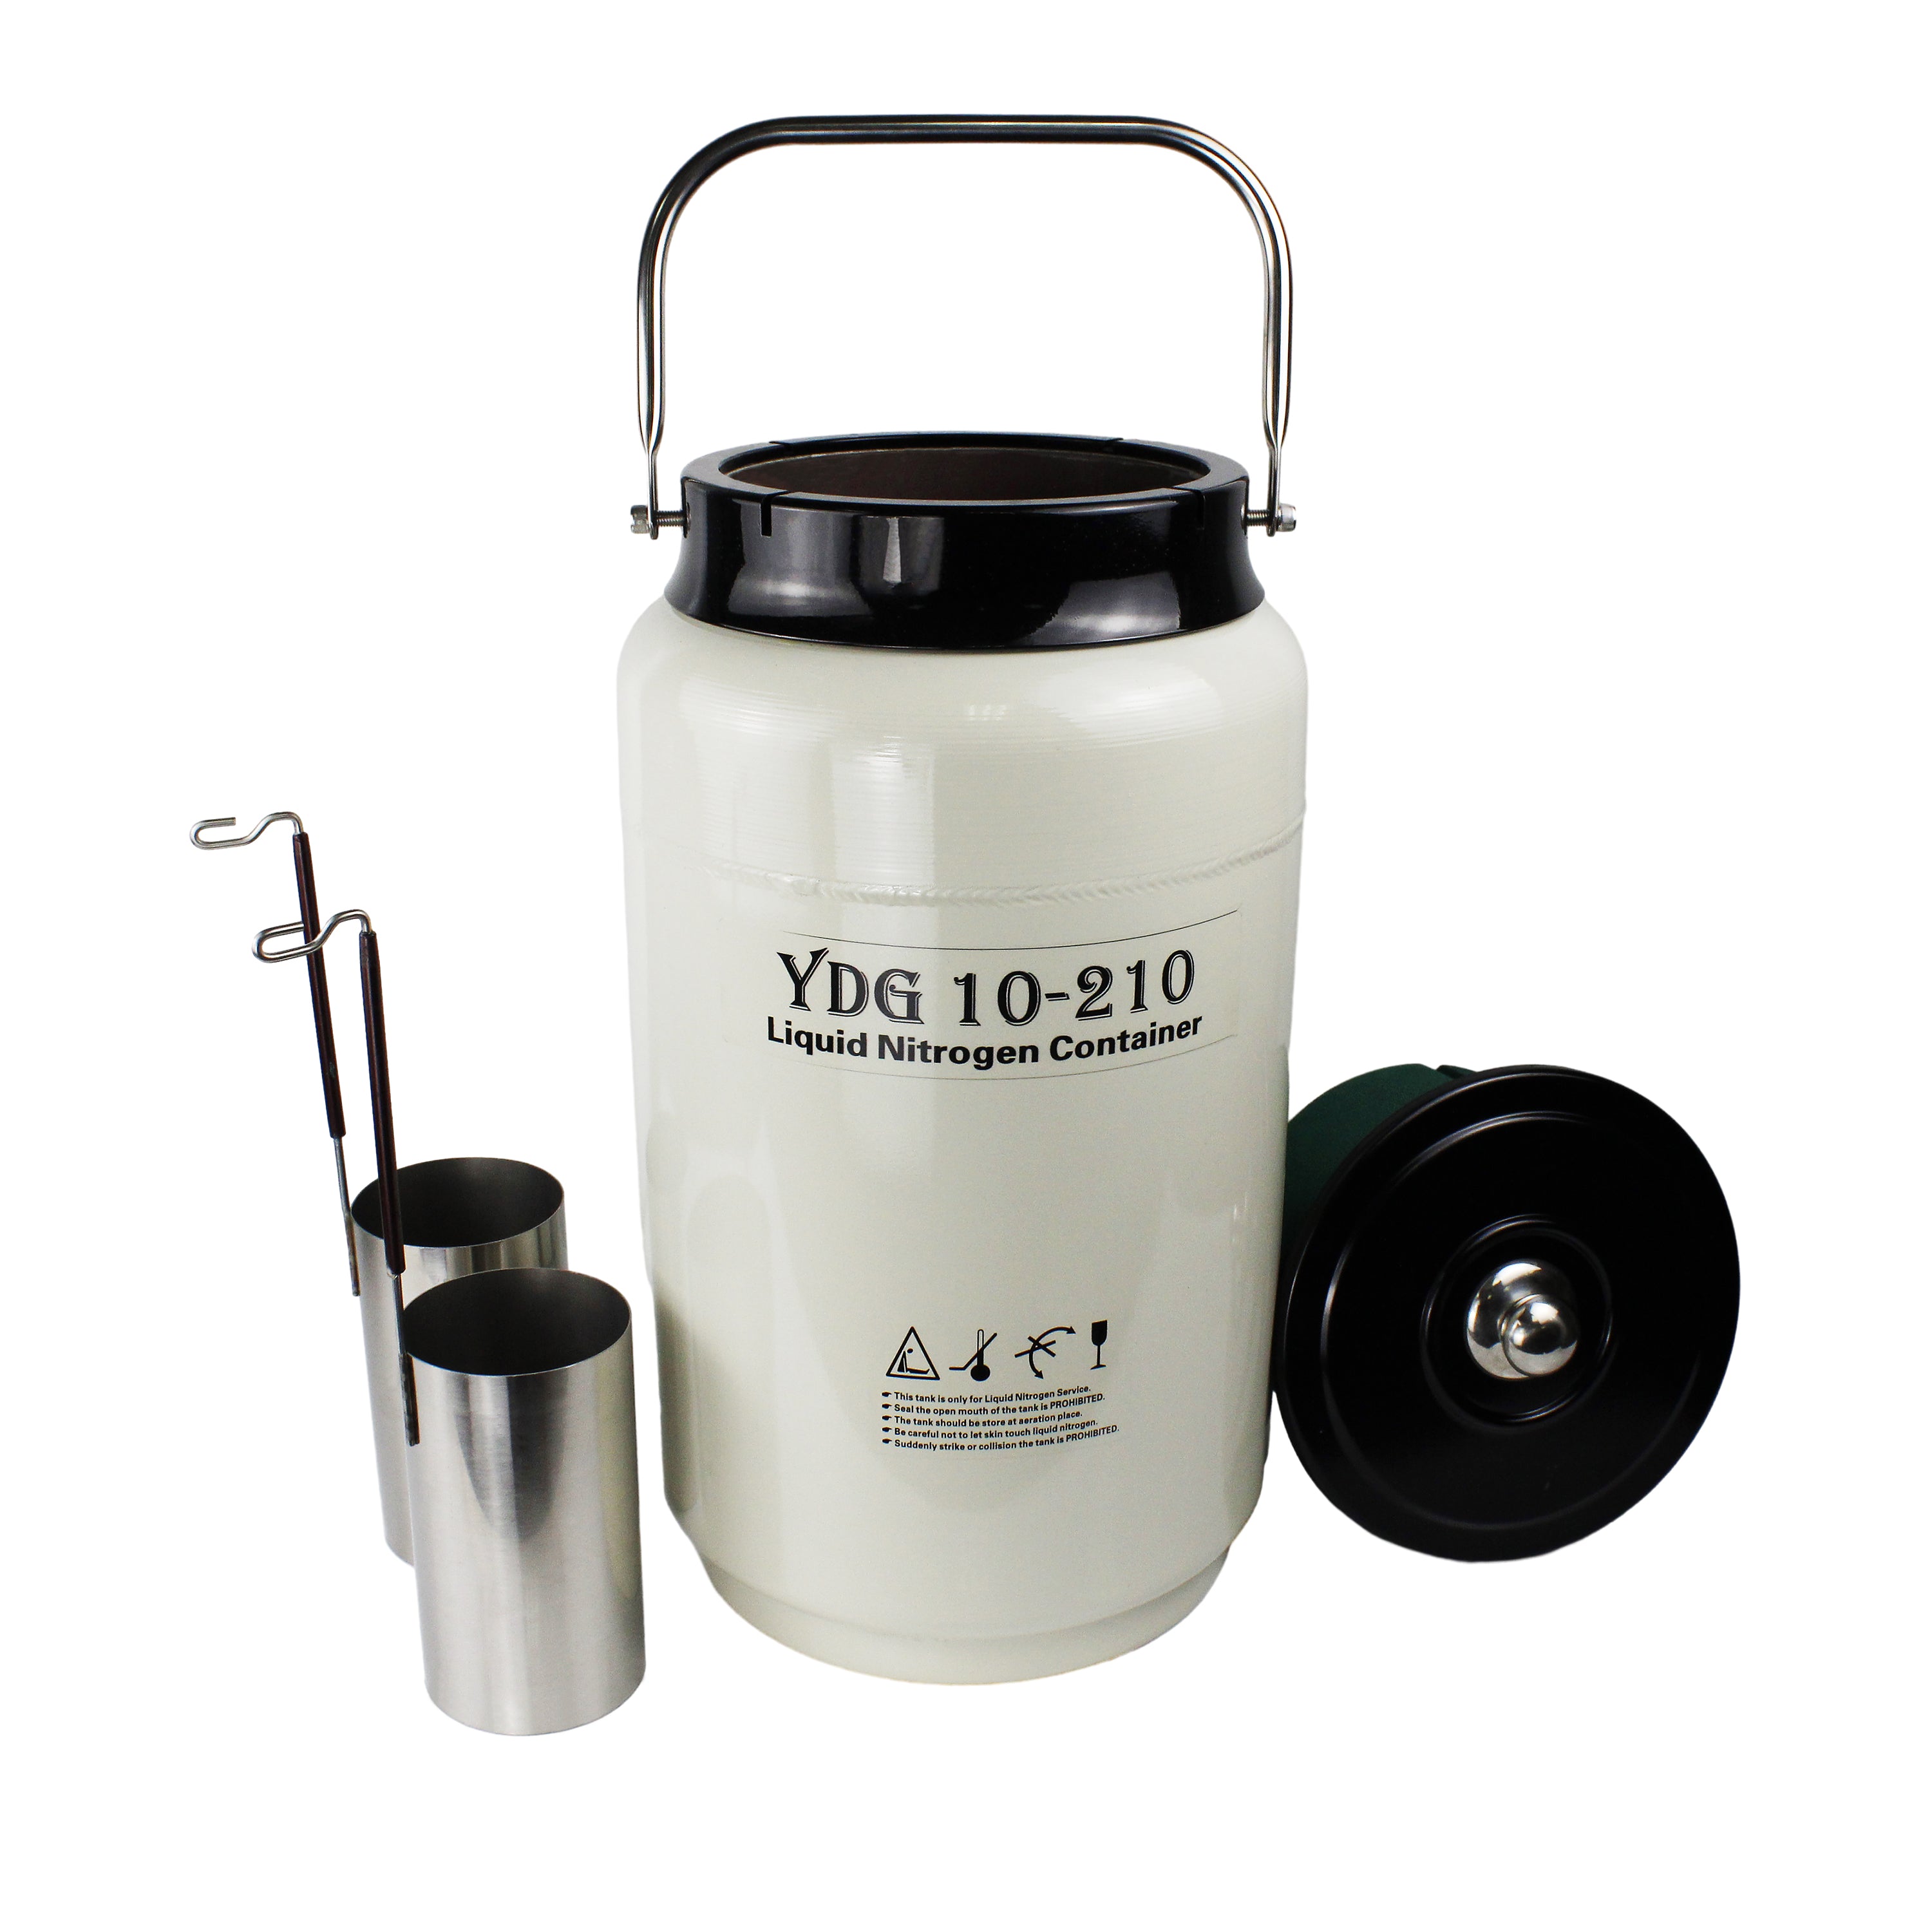 Liquid Nitrogen Container, SHengwin 20L Liquid Nitrogen Tank LN2 Cryogenic  Container with 3 Canisters and Carry Bag